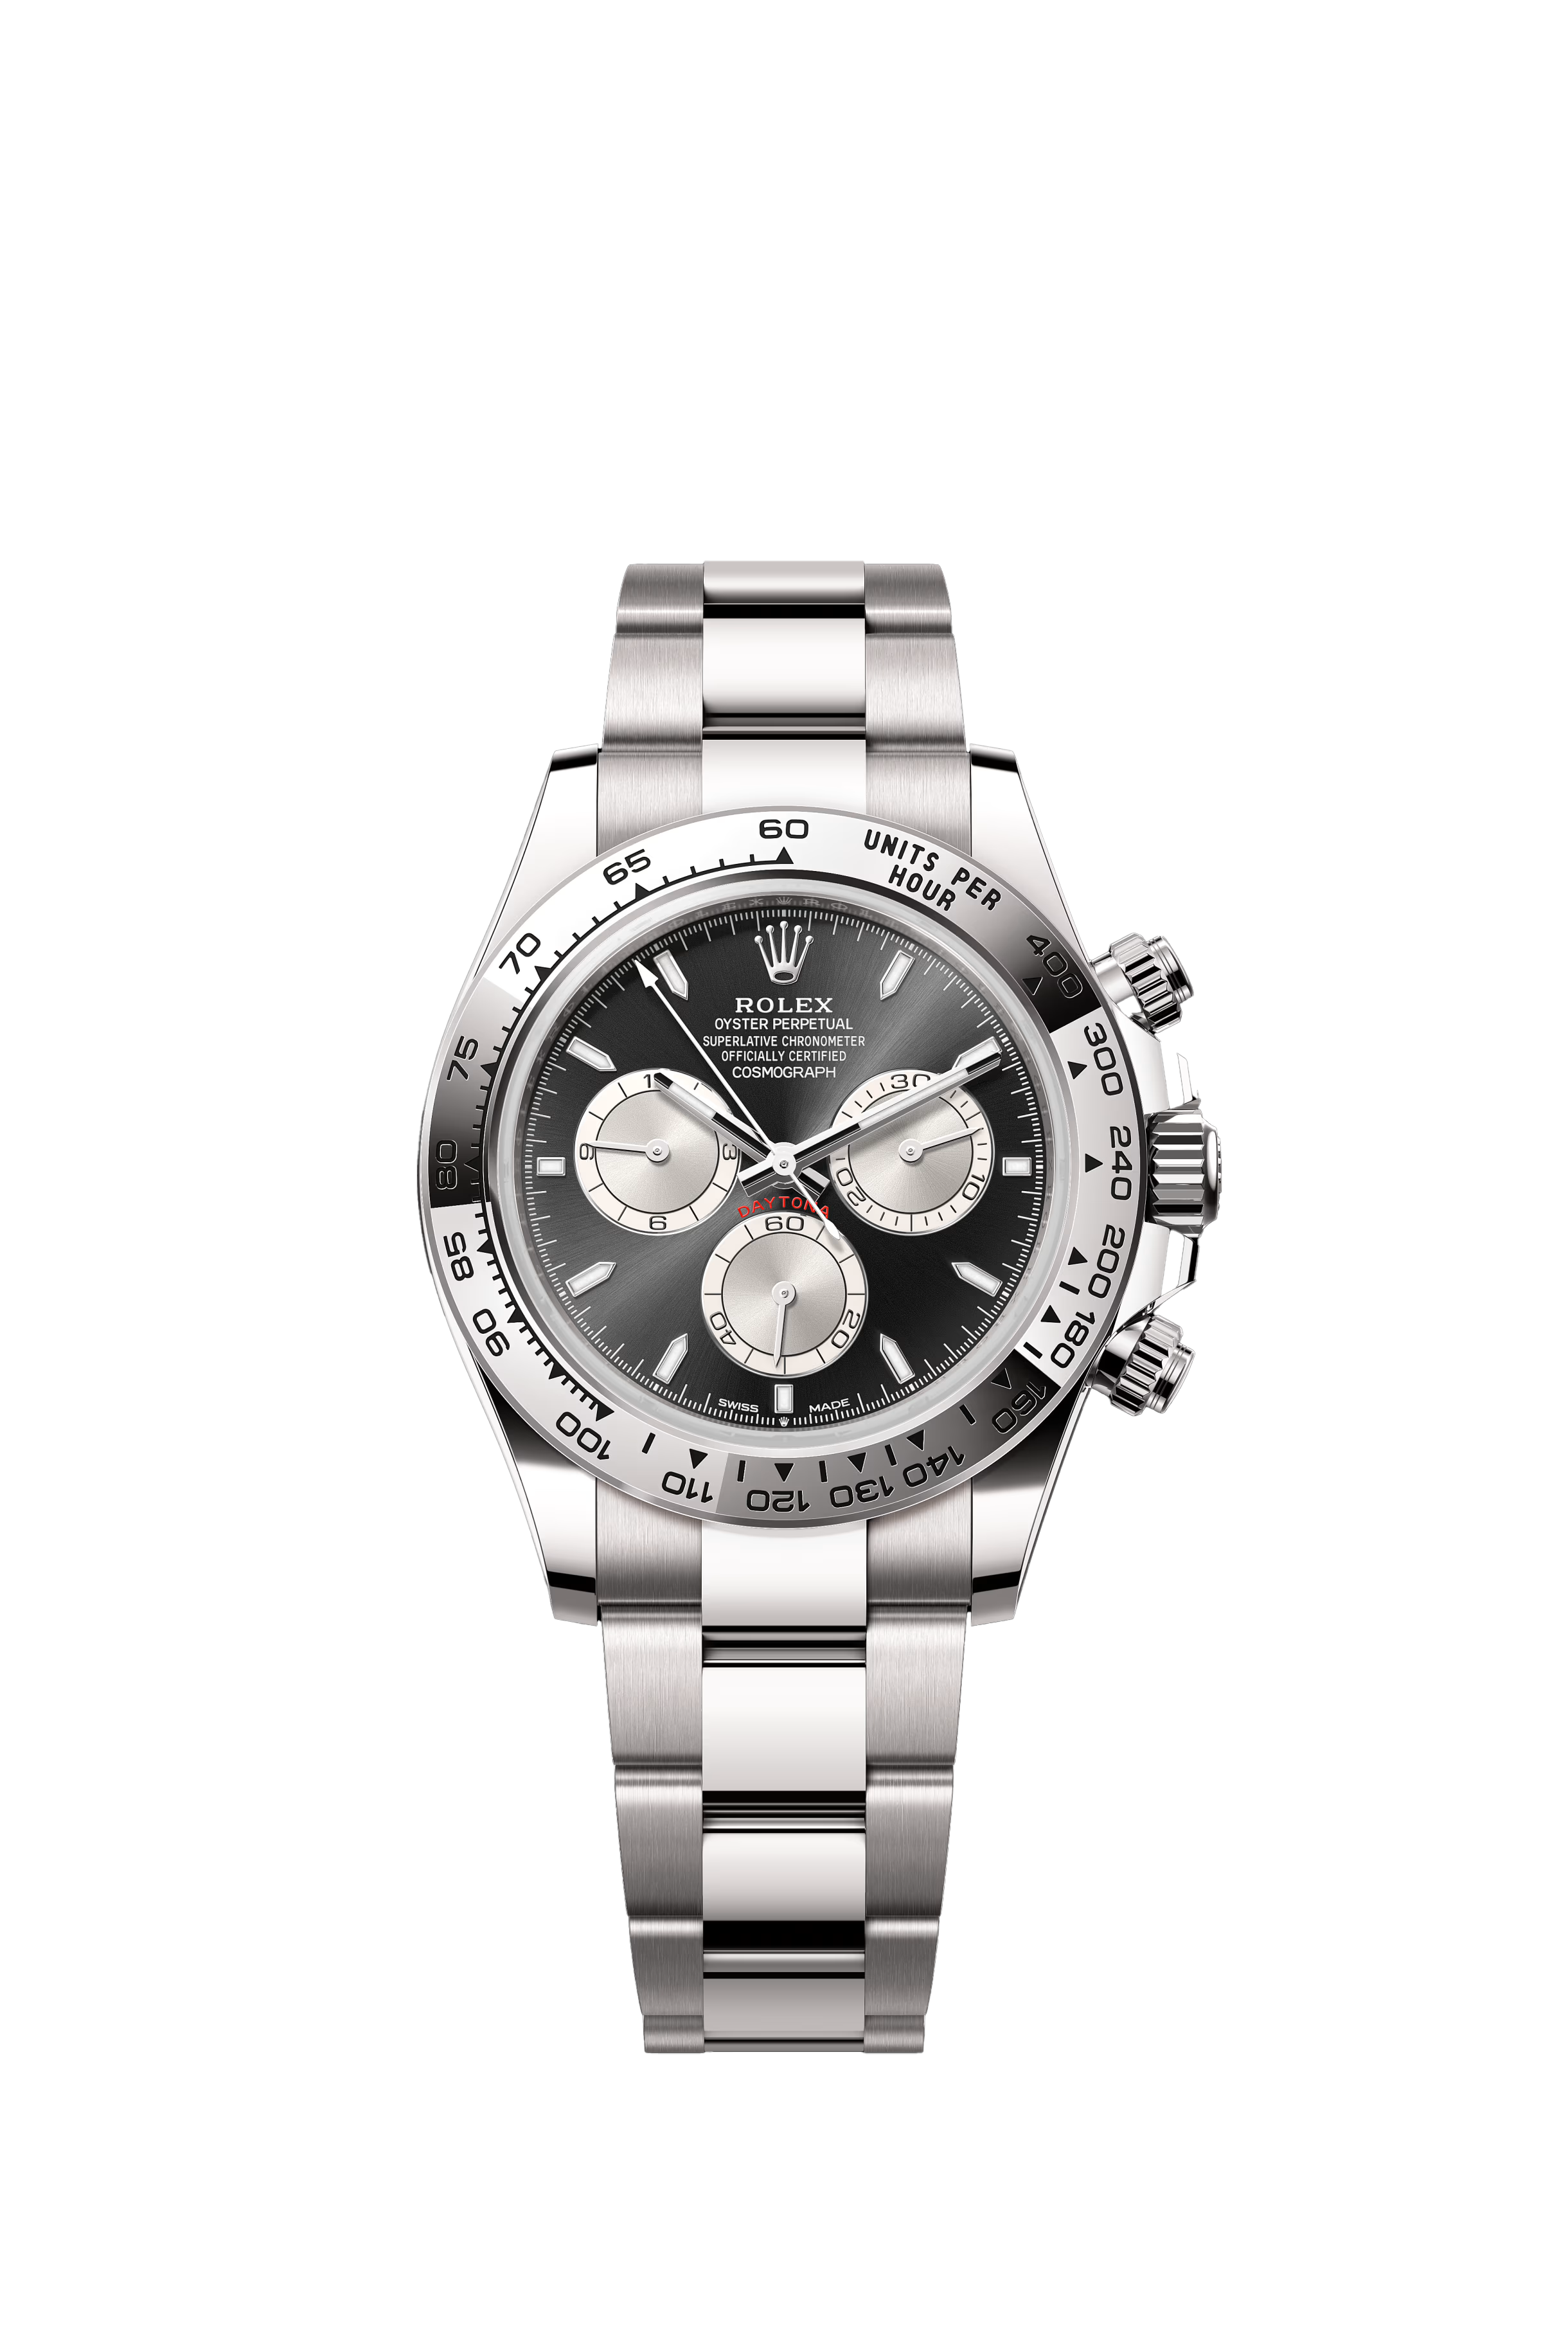 Rolex Cosmograph Daytona Oyster, 40 mm, white gold Reference 126509